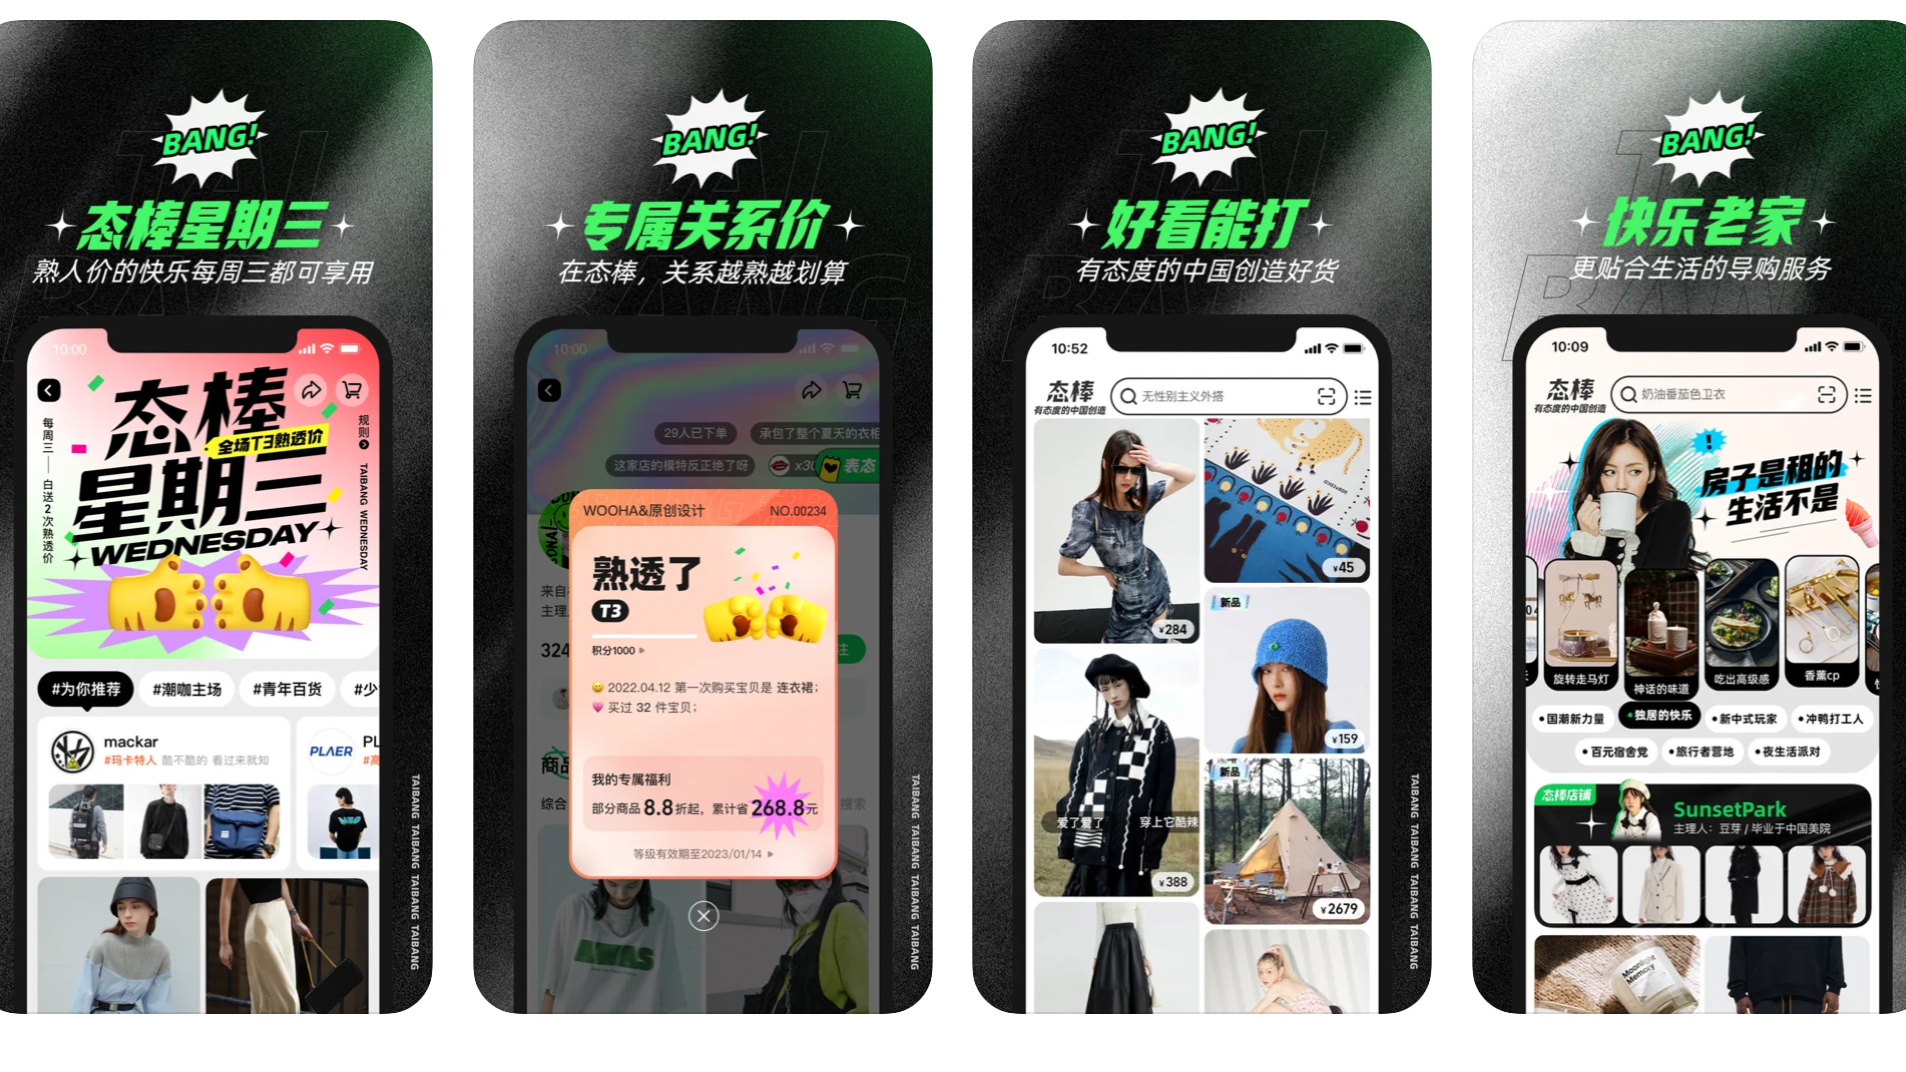 Tech giant Alibaba is testing a new social commerce app called “Taibang.” Could it pose a threat to Xiaohongshu? Photo: Screenshot, App Store